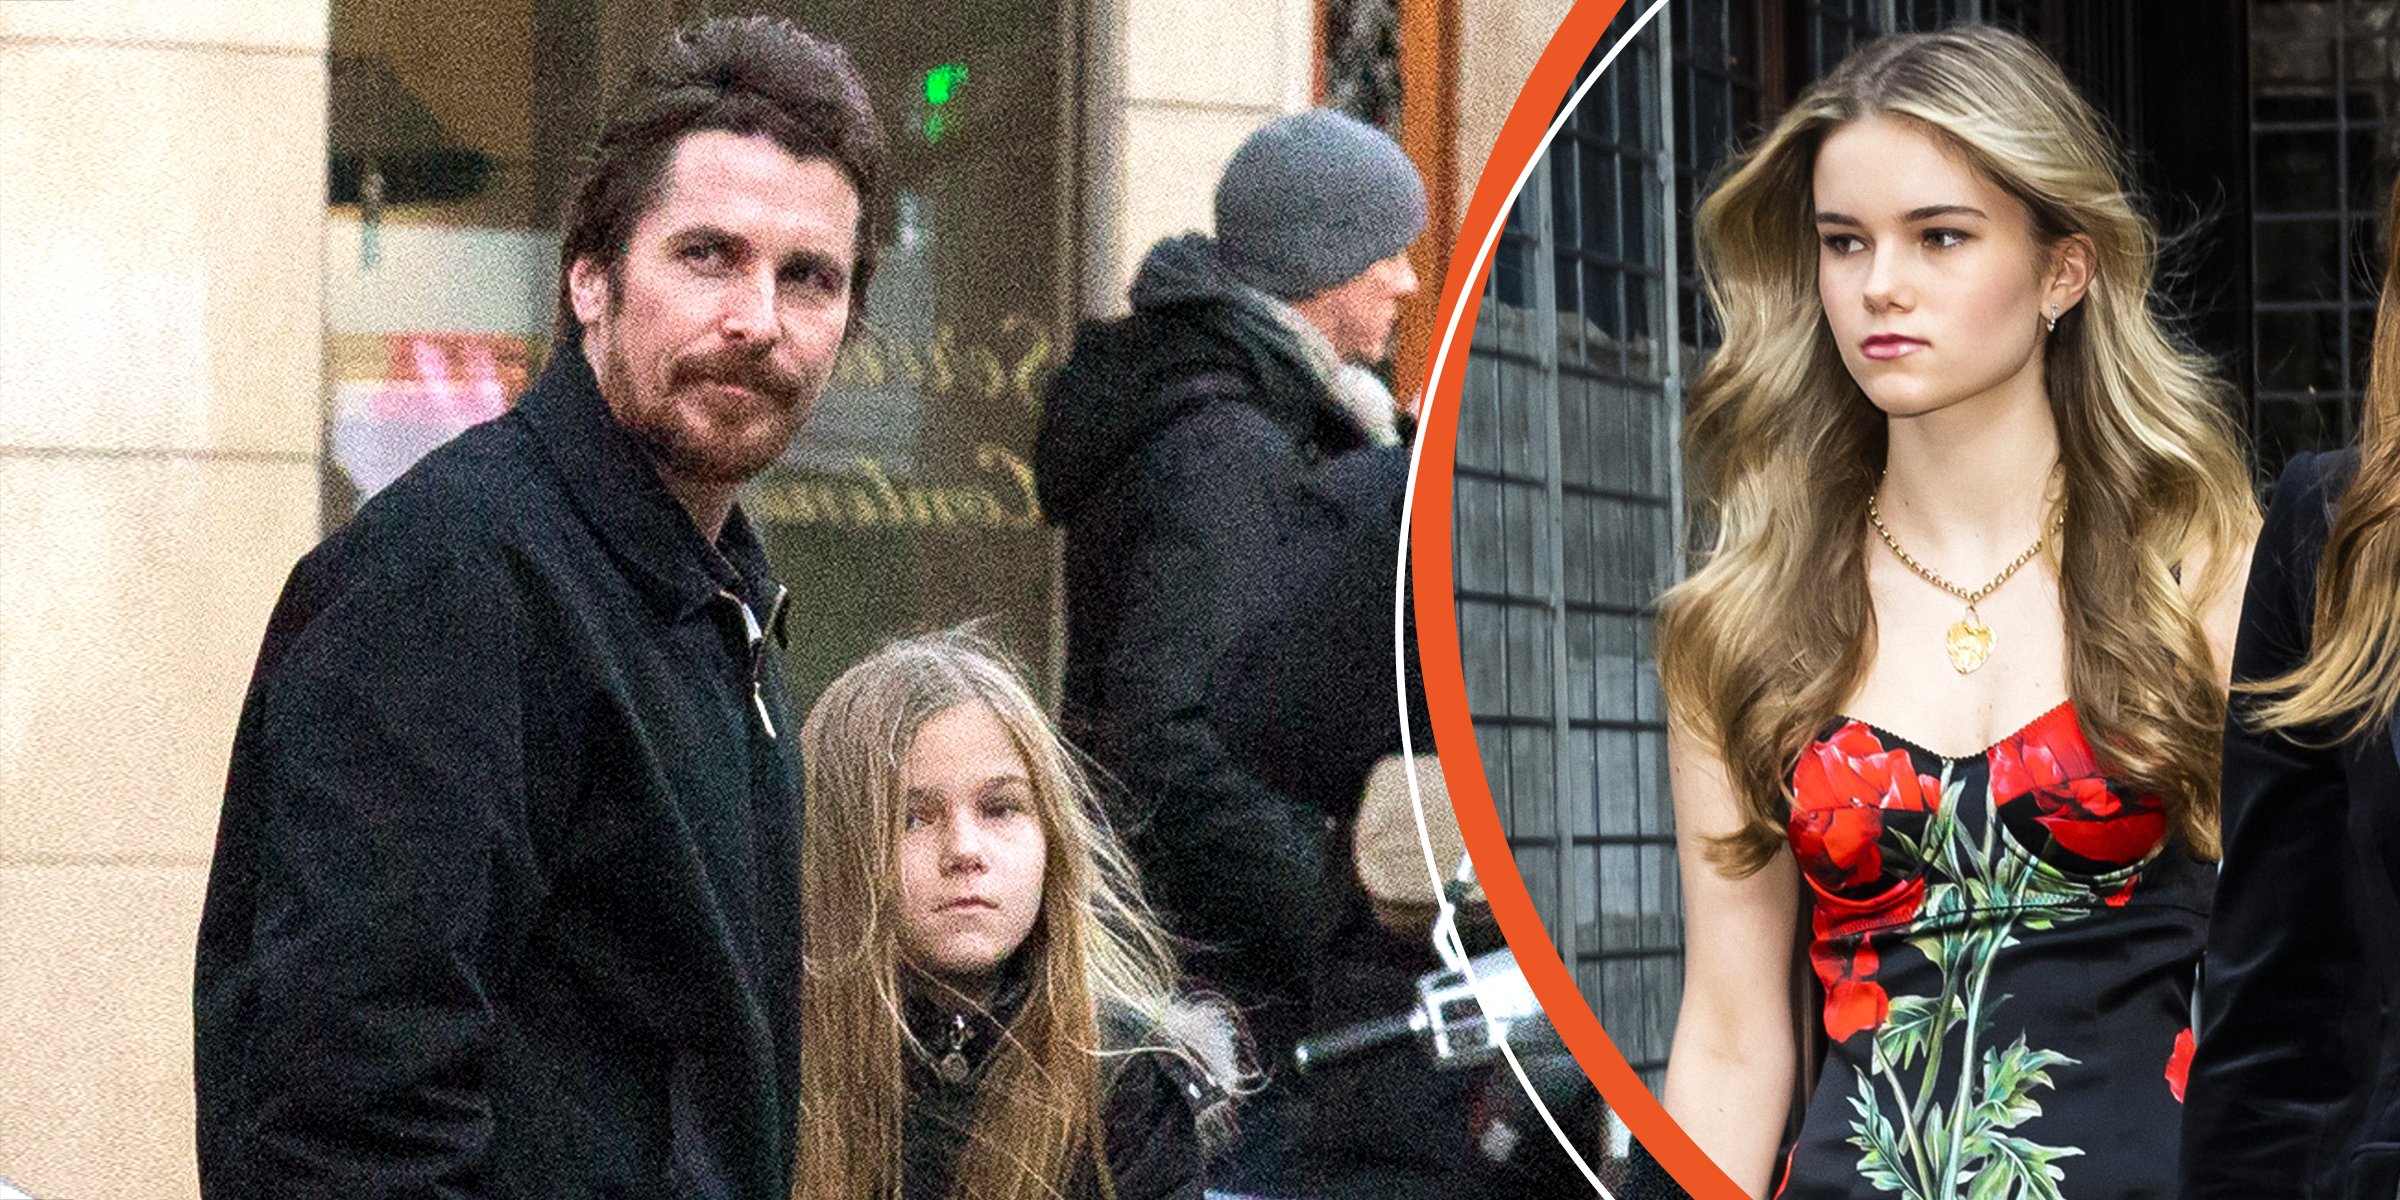 Christian Bale and his daughter Emmeline Bale | Emmeline Bale | Source: Getty Images